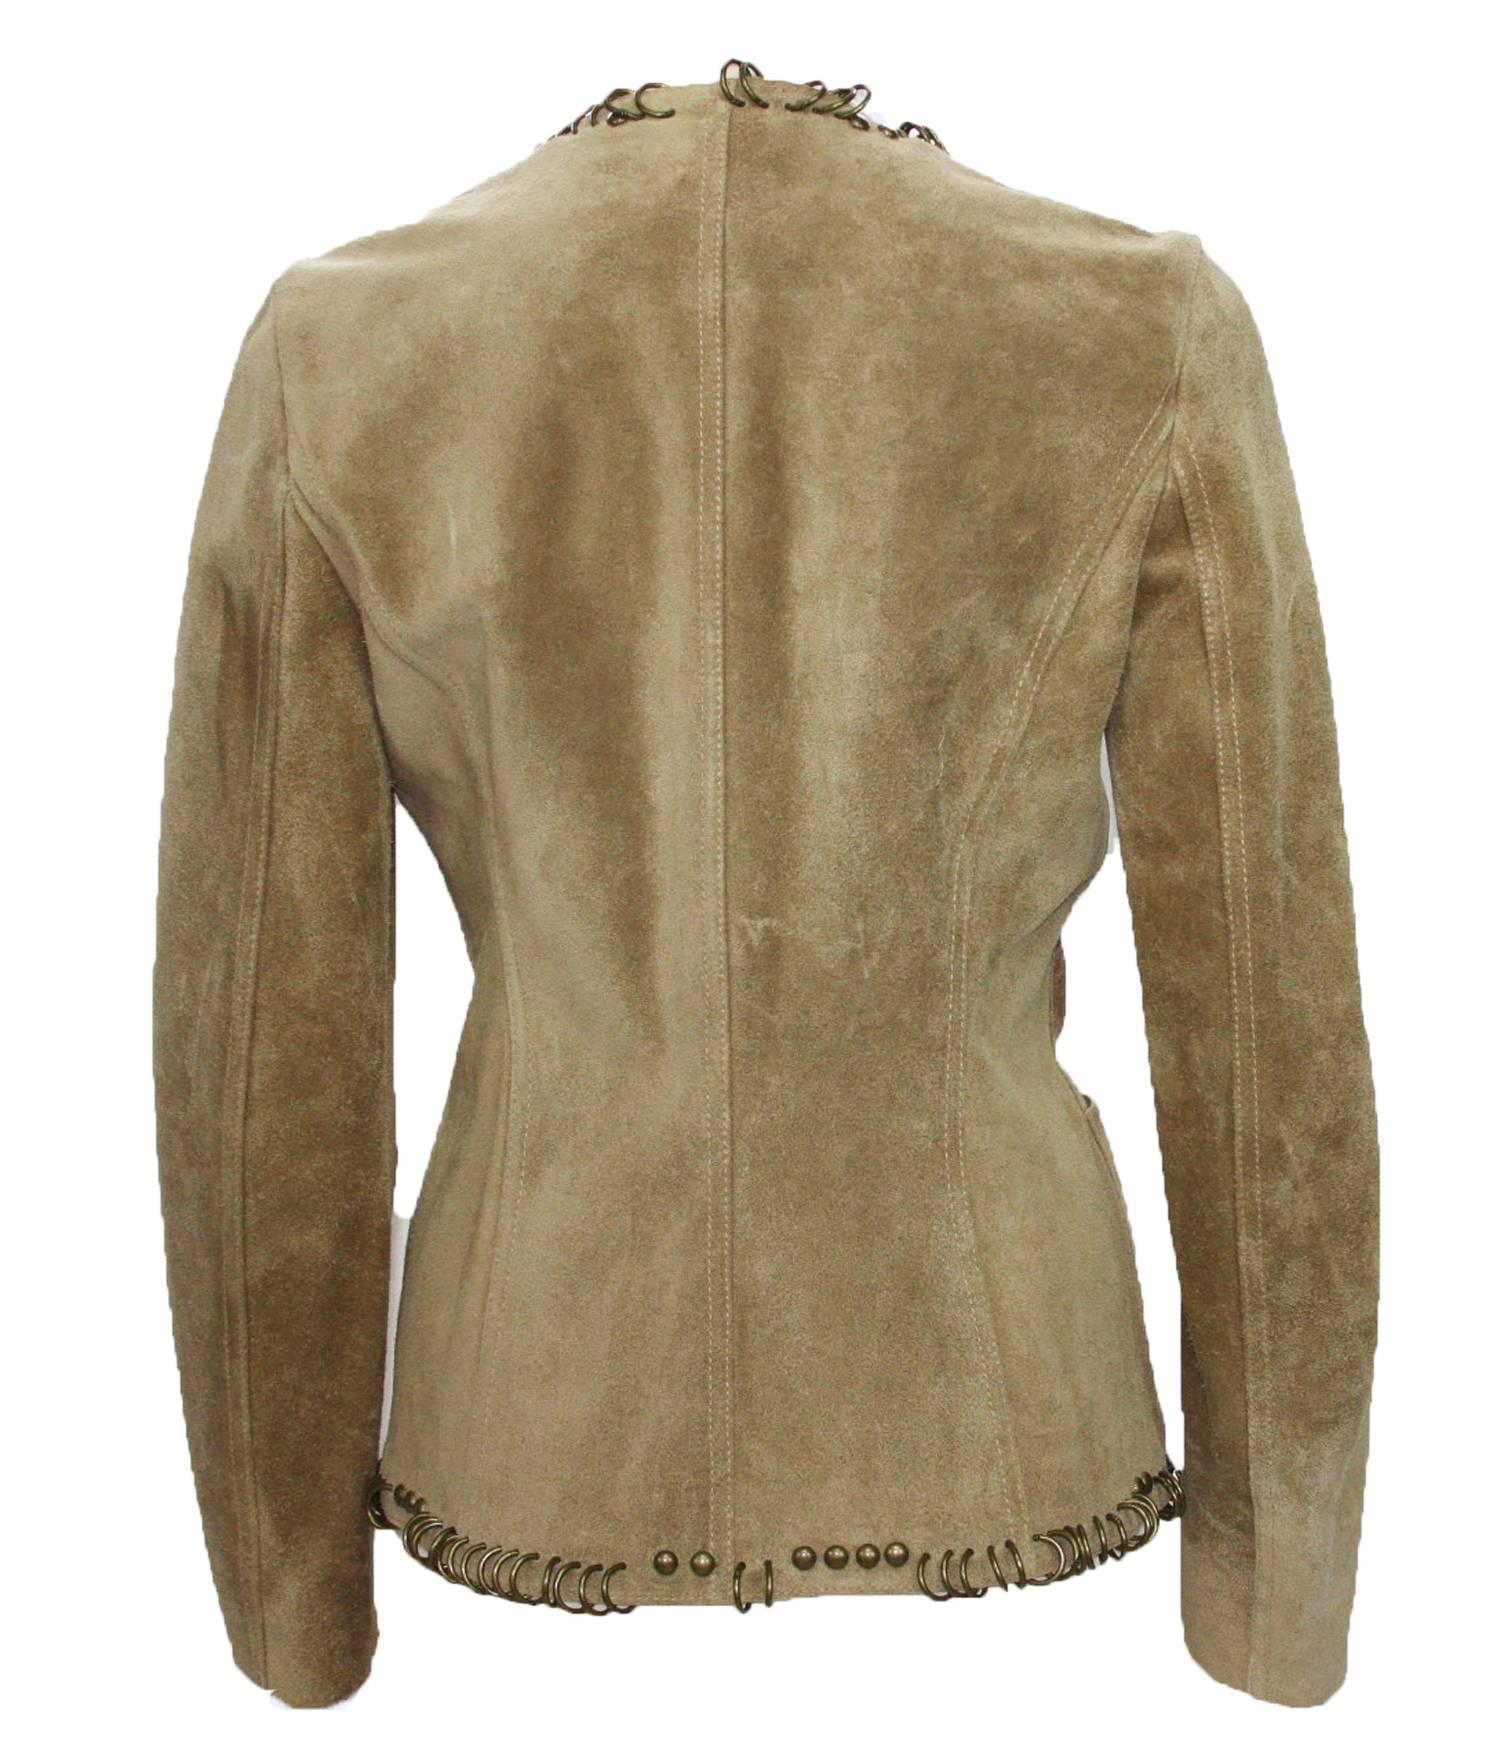 New Tom Ford for Yves Saint Laurent Suede Jacket
2002 Collection
Designer Size 36
Color - Beige
Embellished with Brass Ring and Studs
Features Patch Pockets at Hem
One Hook and Eye Closure
Measurements Flat: Length - 24 inches, Sleeve - 26